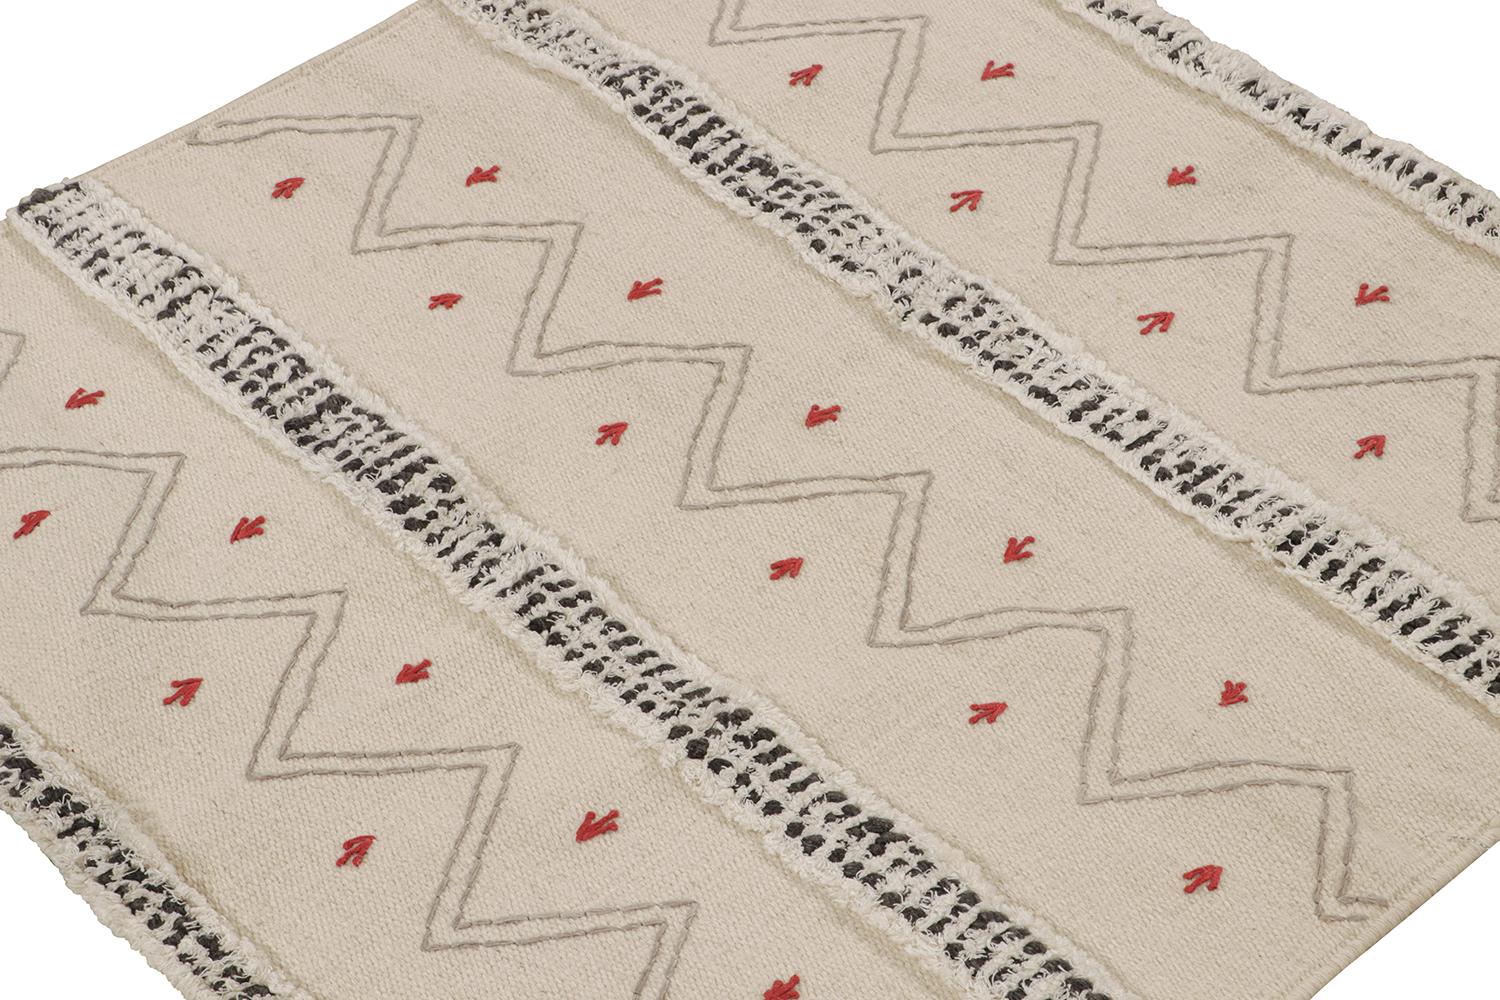 This 3x3 flatweave is a grand new entry to Rug & Kilim’s repertoire of contemporary kilims. Handwoven in wool.

On the Design: 

This piece is inspired by tribal flatweaves, and revels in off-white with gray, red and black accents. Keen eyes will